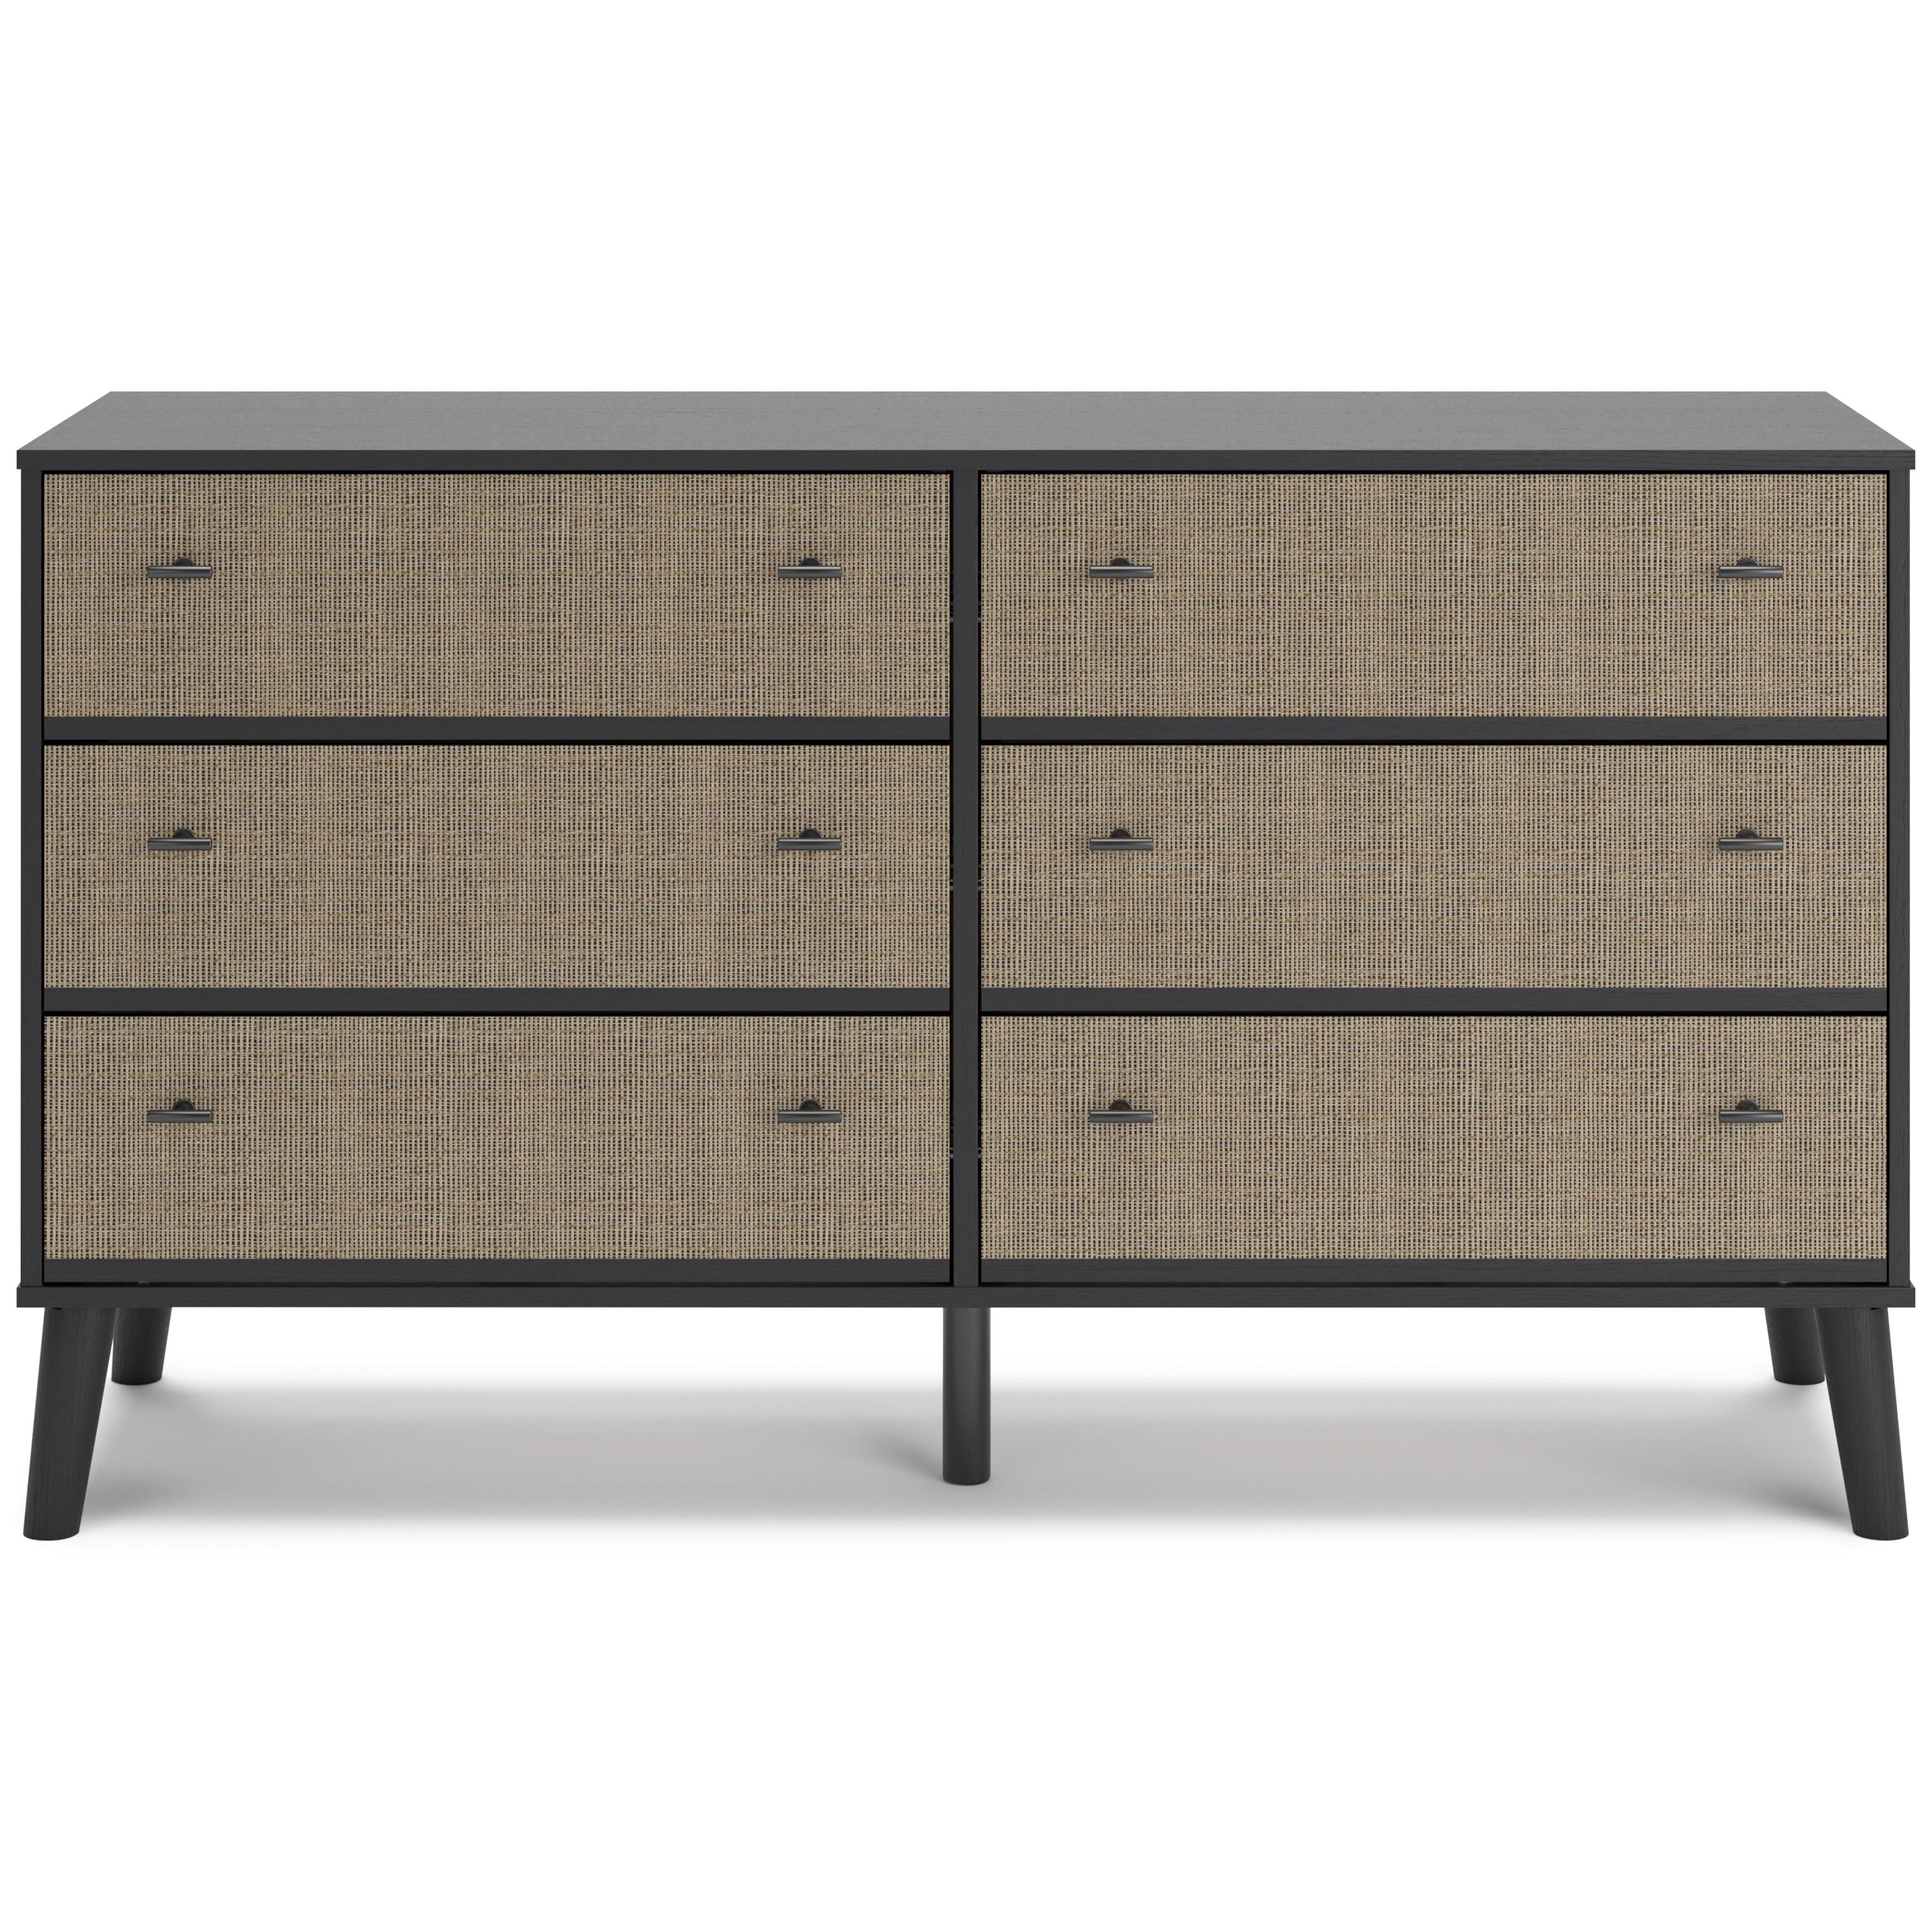 Signature Design by Ashley Charlang 6-Drawer Dresser EB1198-231 IMAGE 3